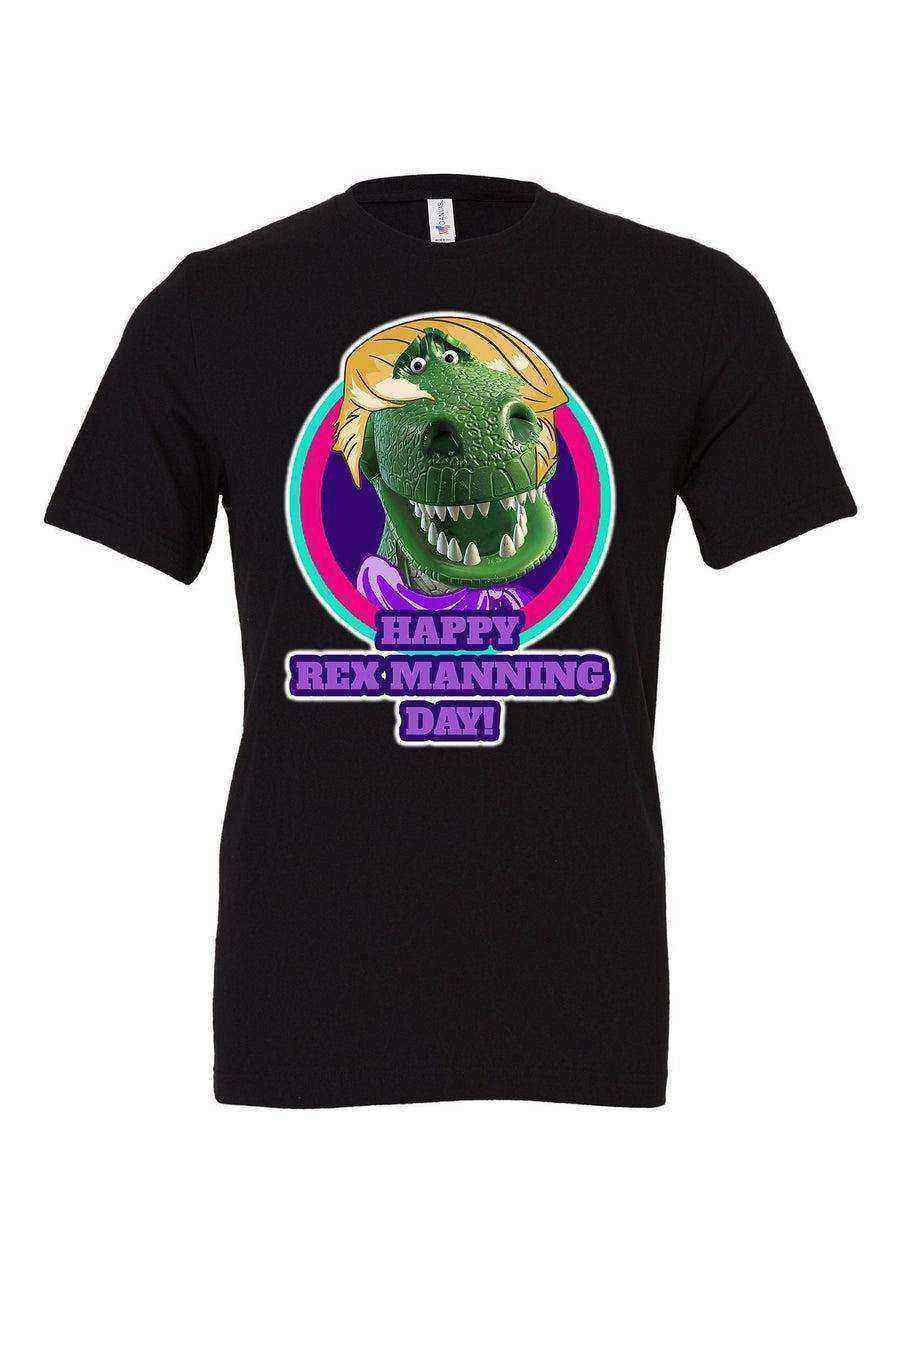 Rex Manning Day Shirt | Empire Records Inspired Shirt - Dylan's Tees